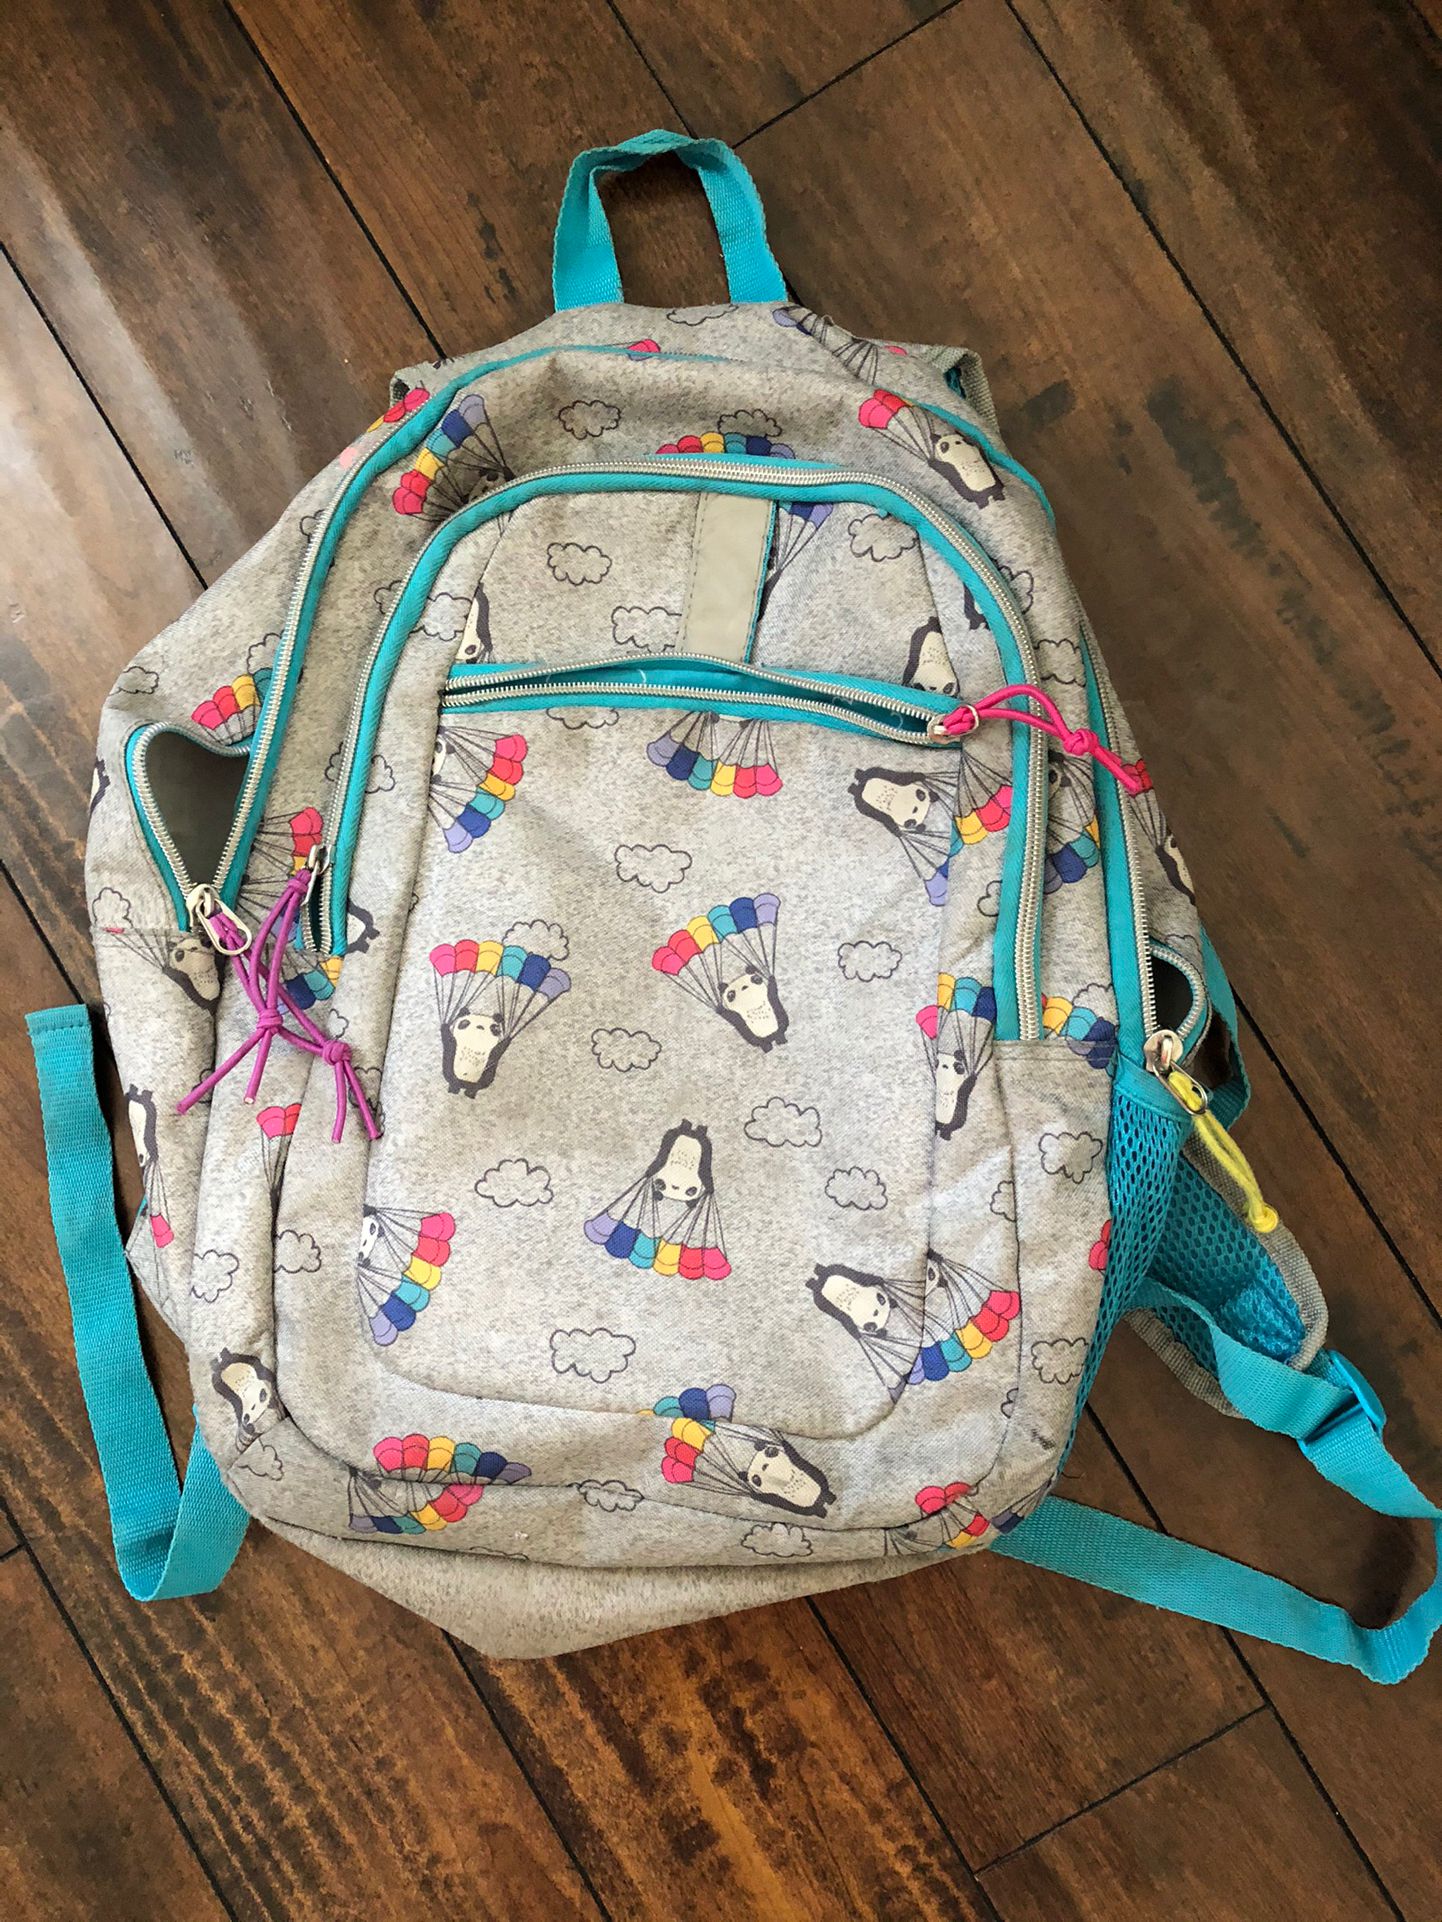 girls school backpack floating pandas with balloons gray and blue